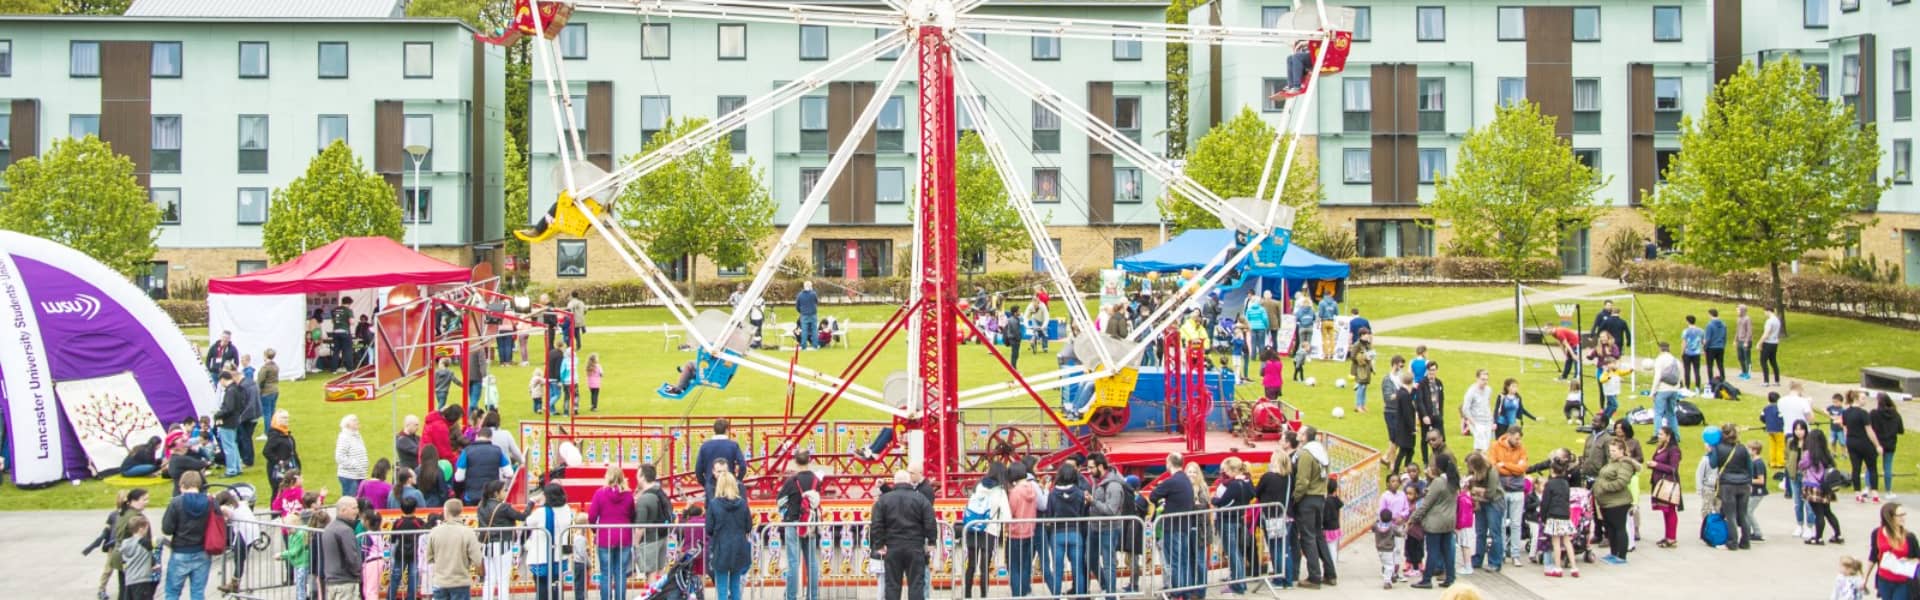 A photo of a Ferris wheel in Lancaster Square during a Family Open Day.